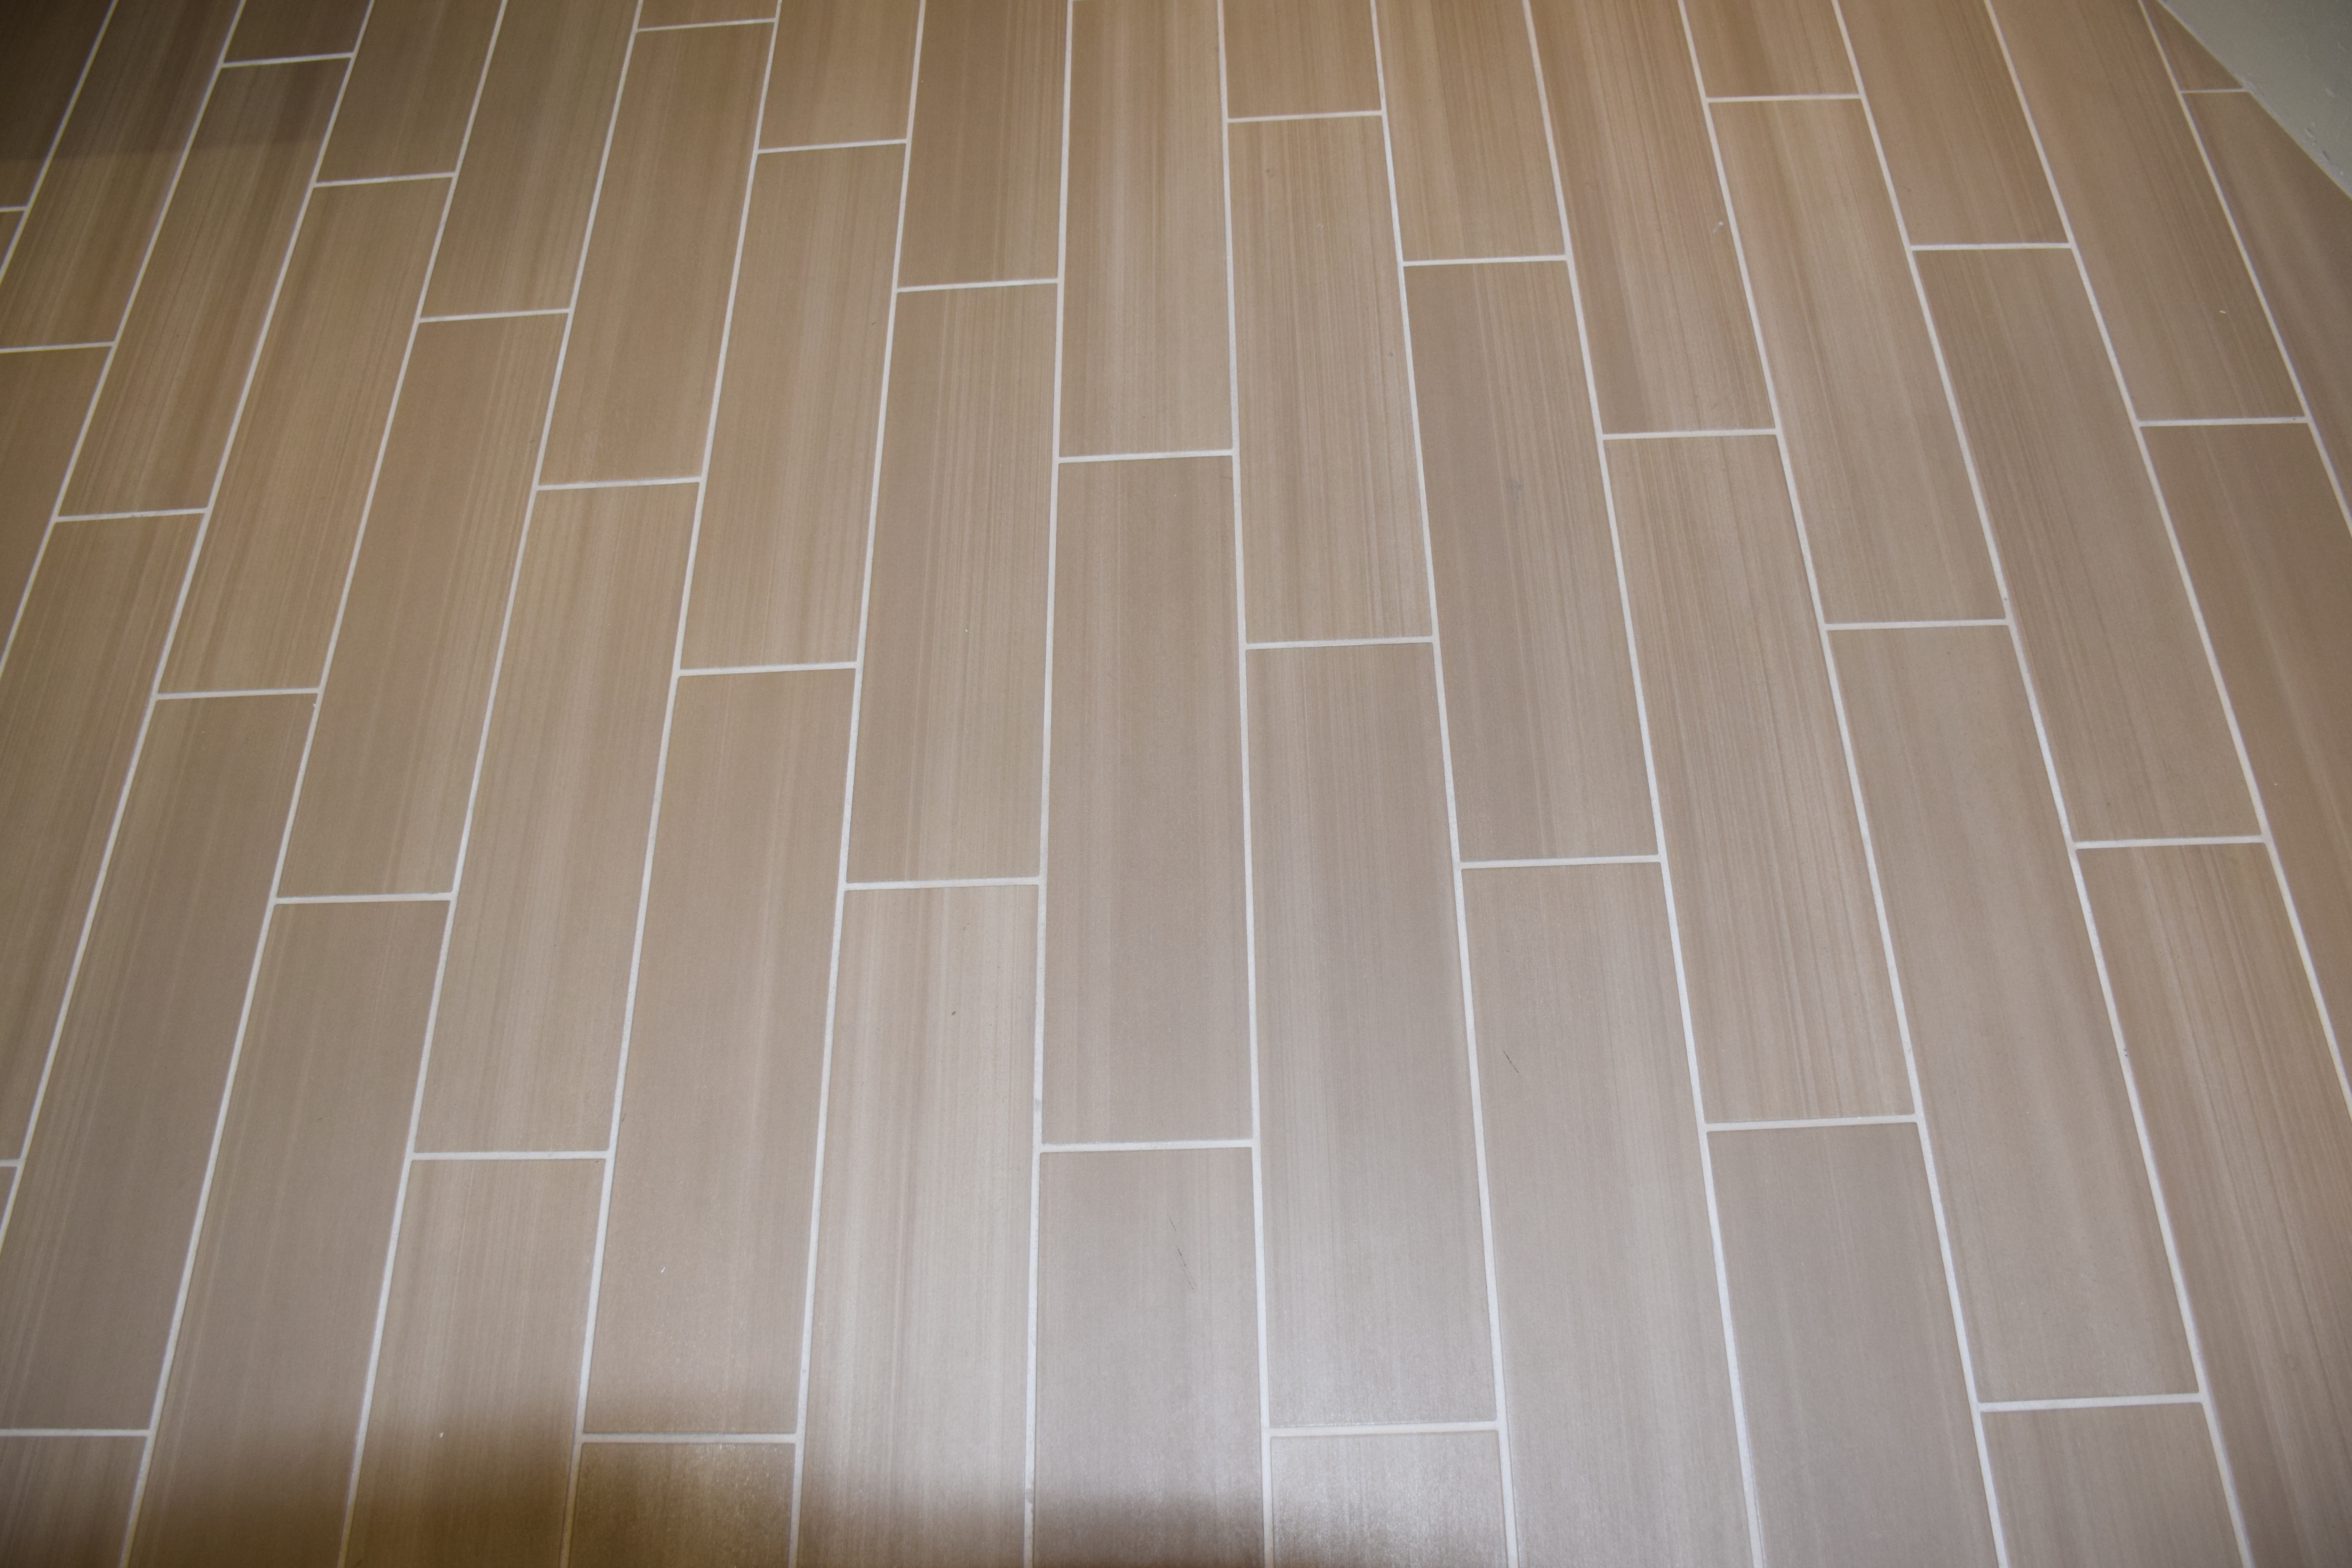 Tile That Looks Like Wood Can Be The, Best Layout For Wood Look Tile